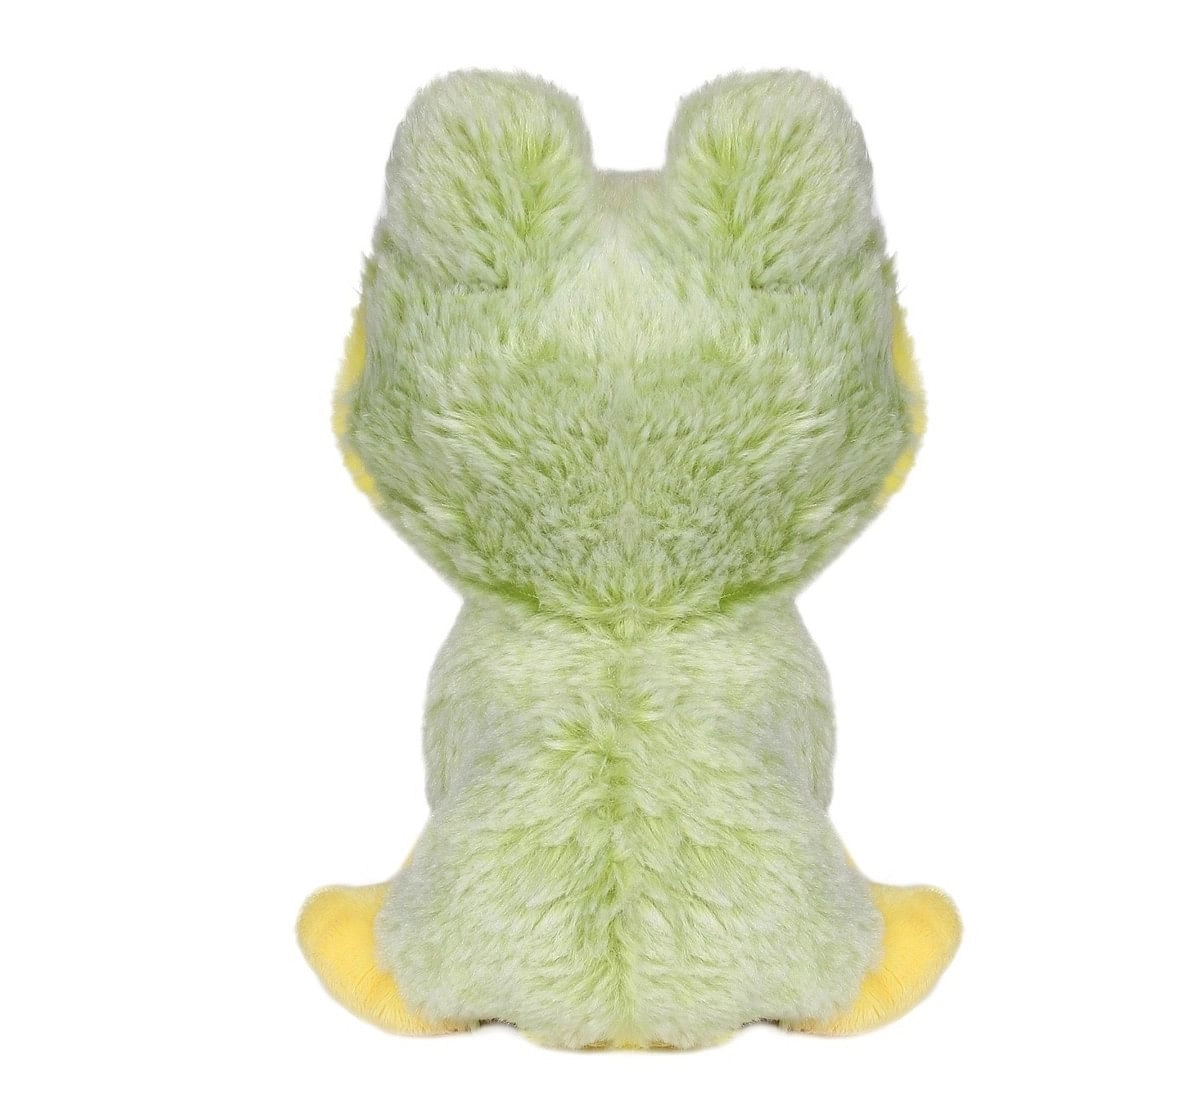 Cuddles Dual Tone Frog 20 Cms Plush Toy for New Born Kids age 0M+